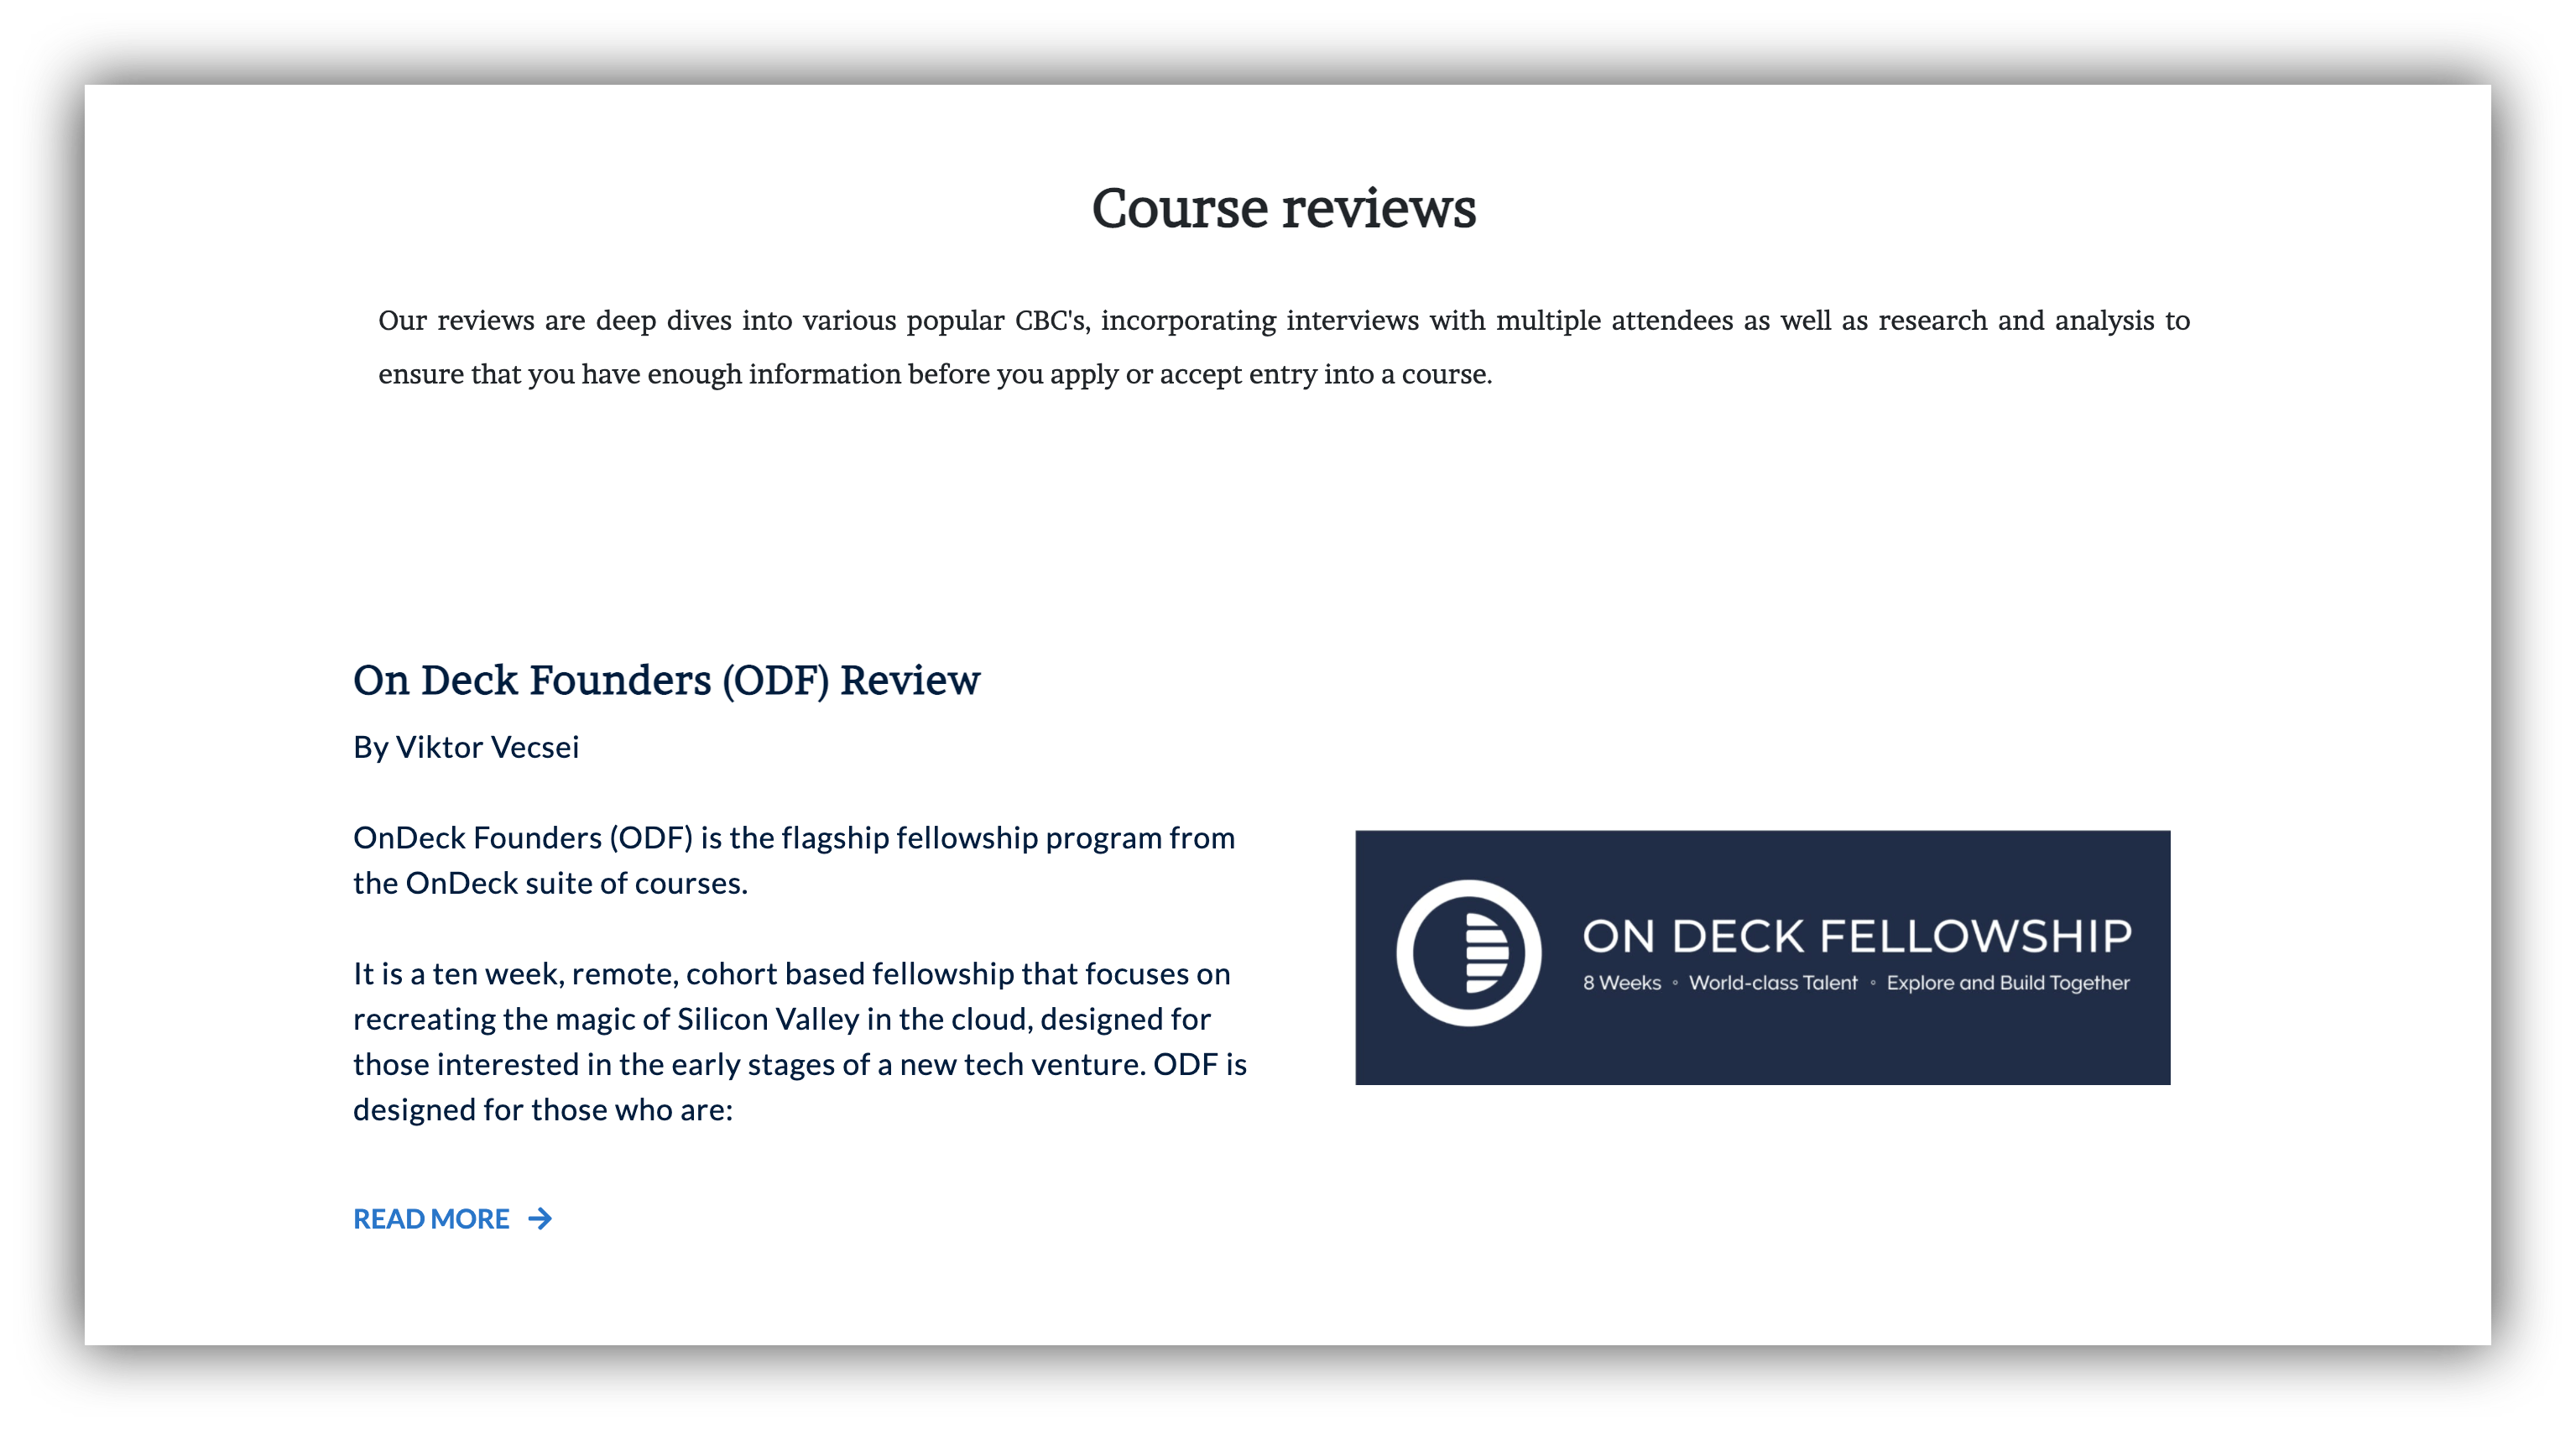 NextCohort course review page